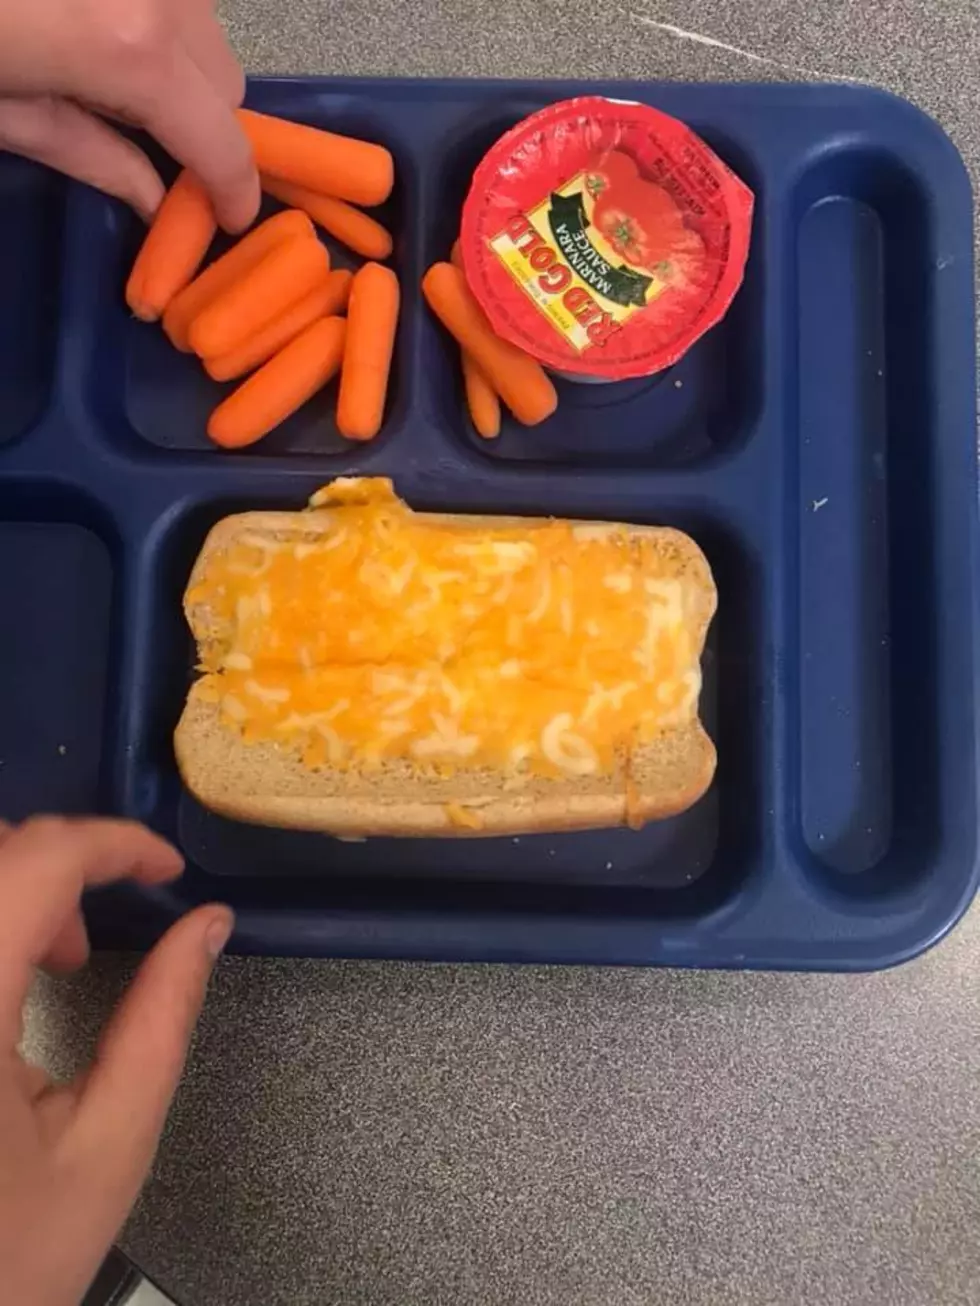 St. Cloud School District Apologizes After School Lunch Photo Goes Viral